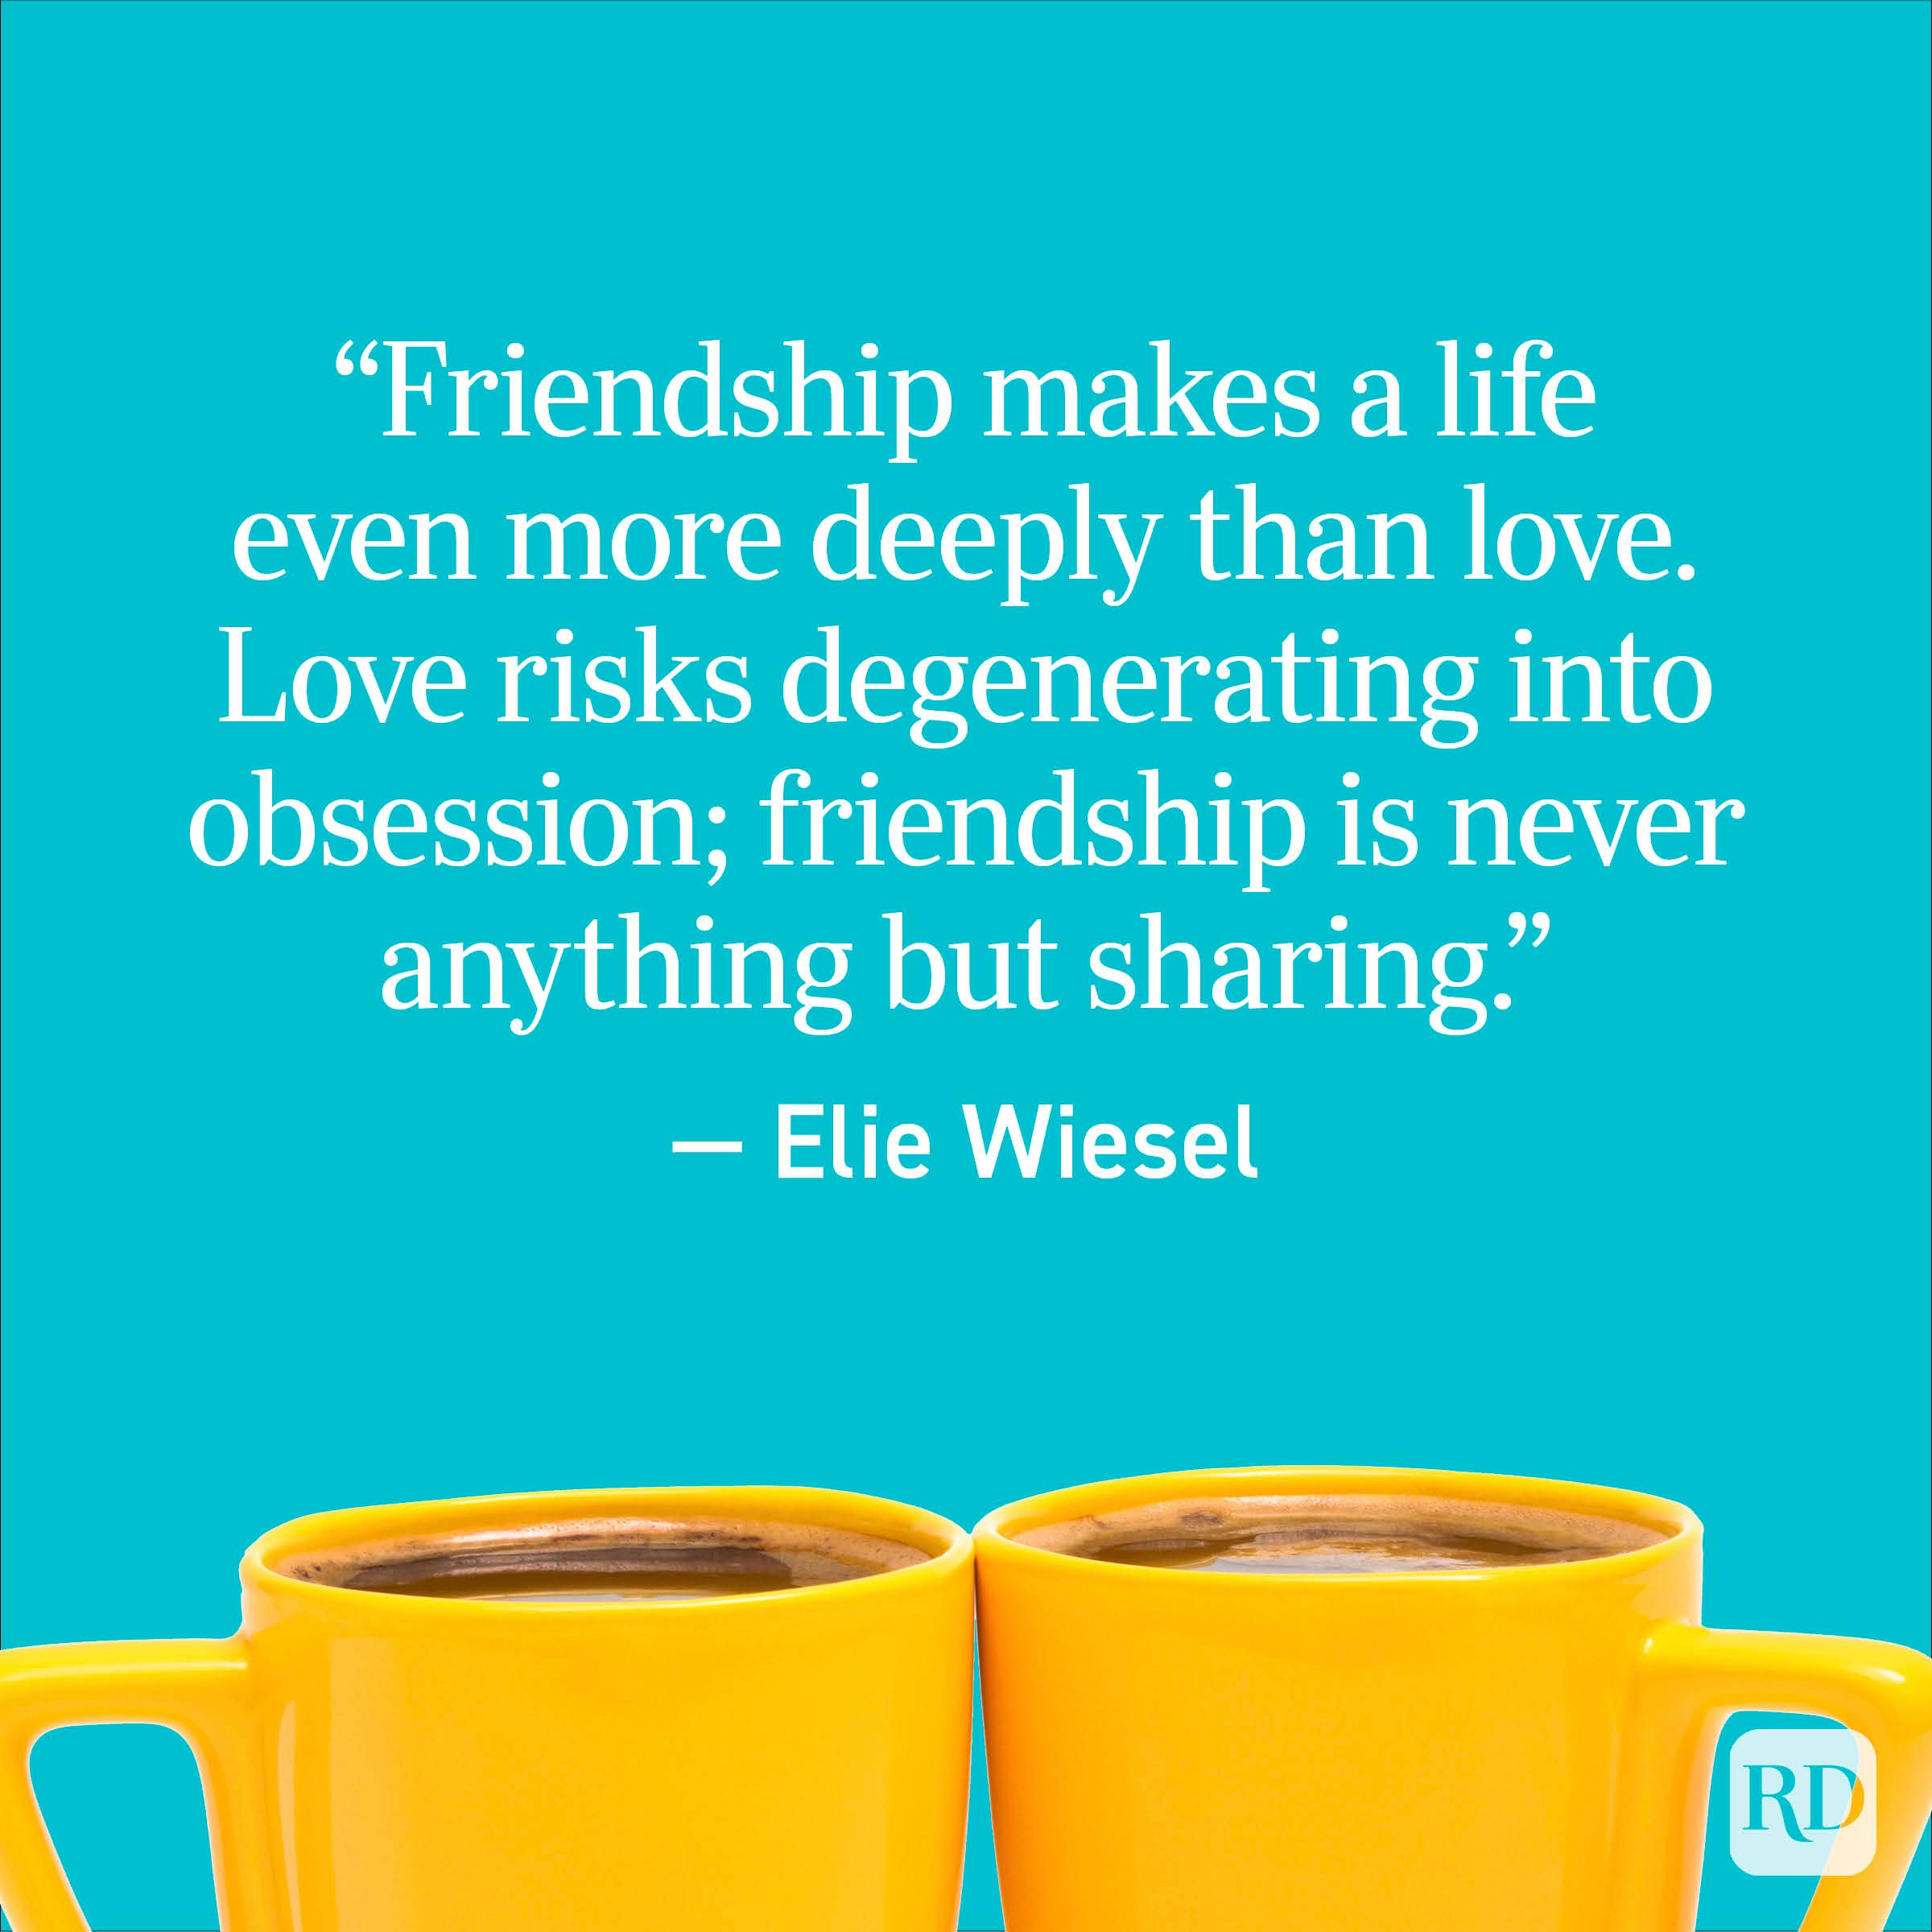 "Friendship makes a life even more deeply than love. Love risks degeneration into obsession; friendship is never anything but sharing." - Elie Wiesel